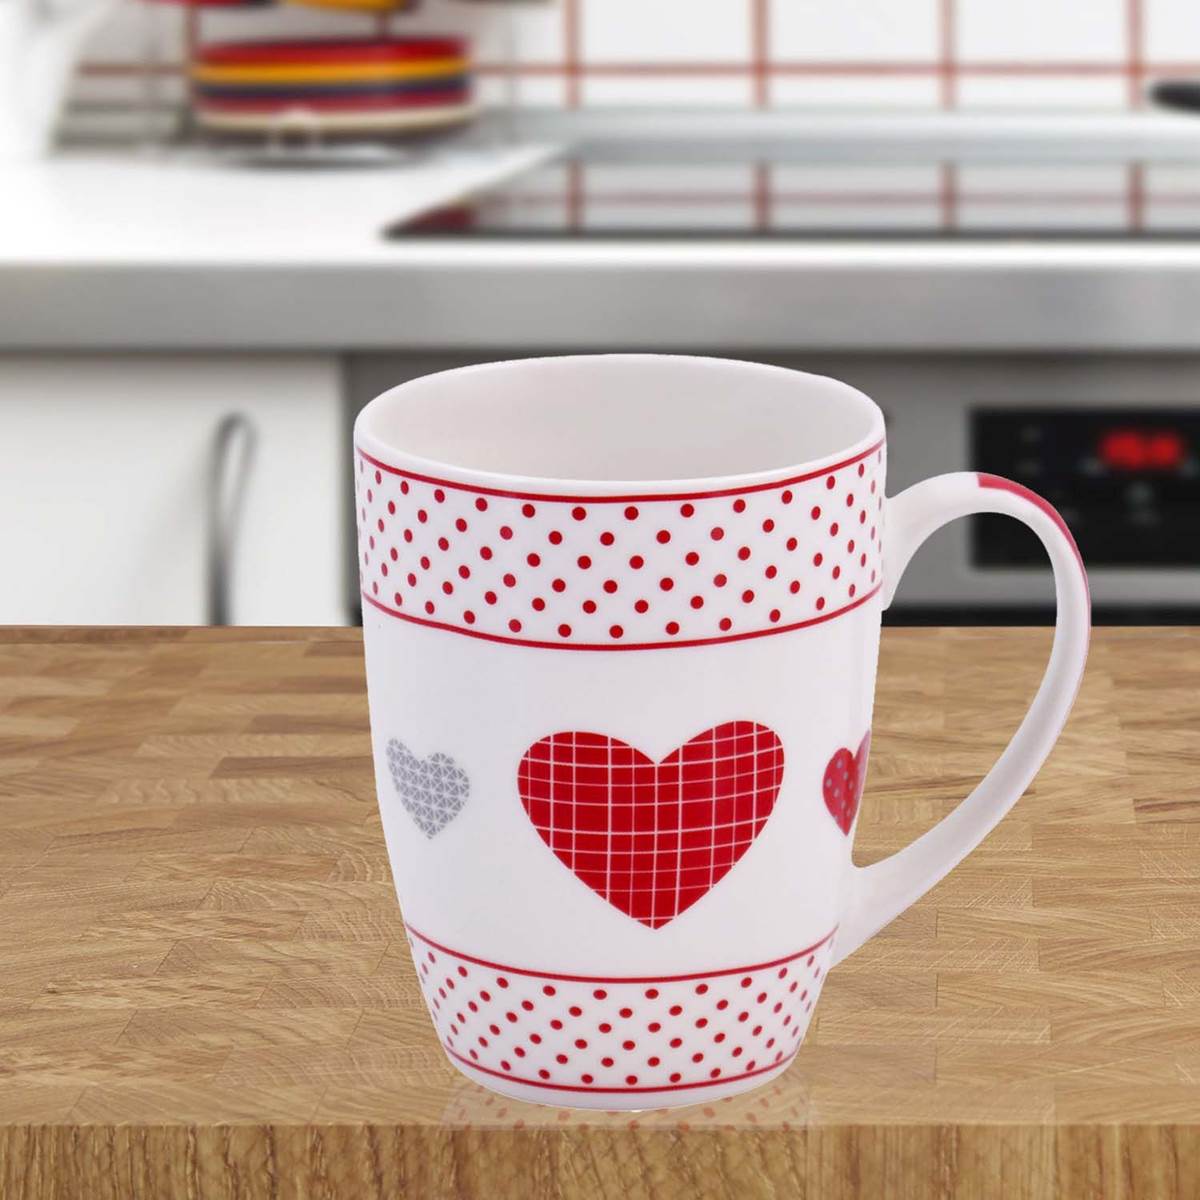 Kookee Printed Ceramic Coffee or Tea Mug with handle for Office, Home or Gifting - 325ml (3788G-D)